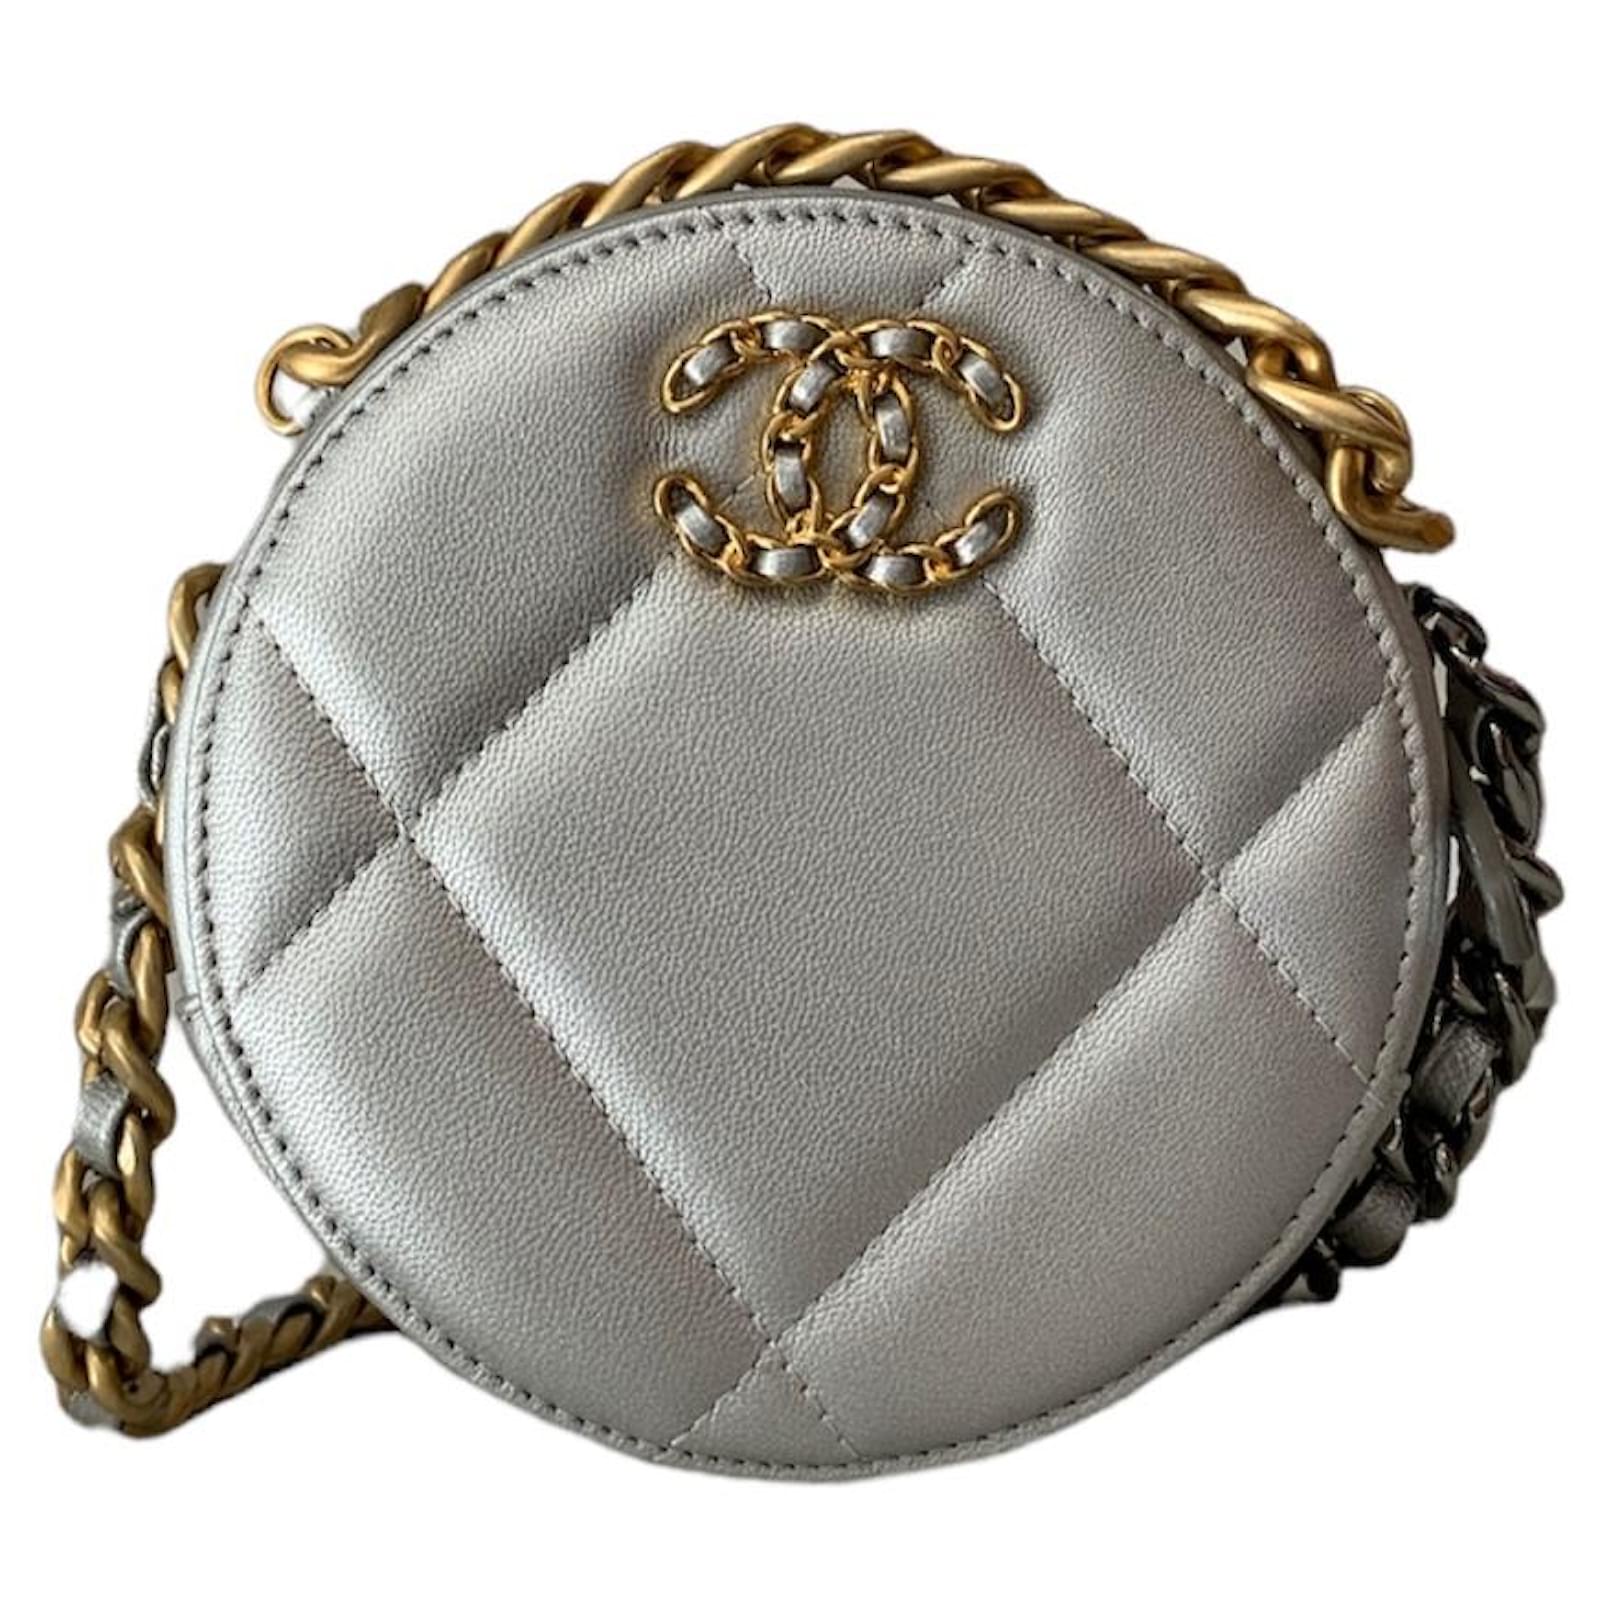 19 Round Clutch with Chain Quilted Leather